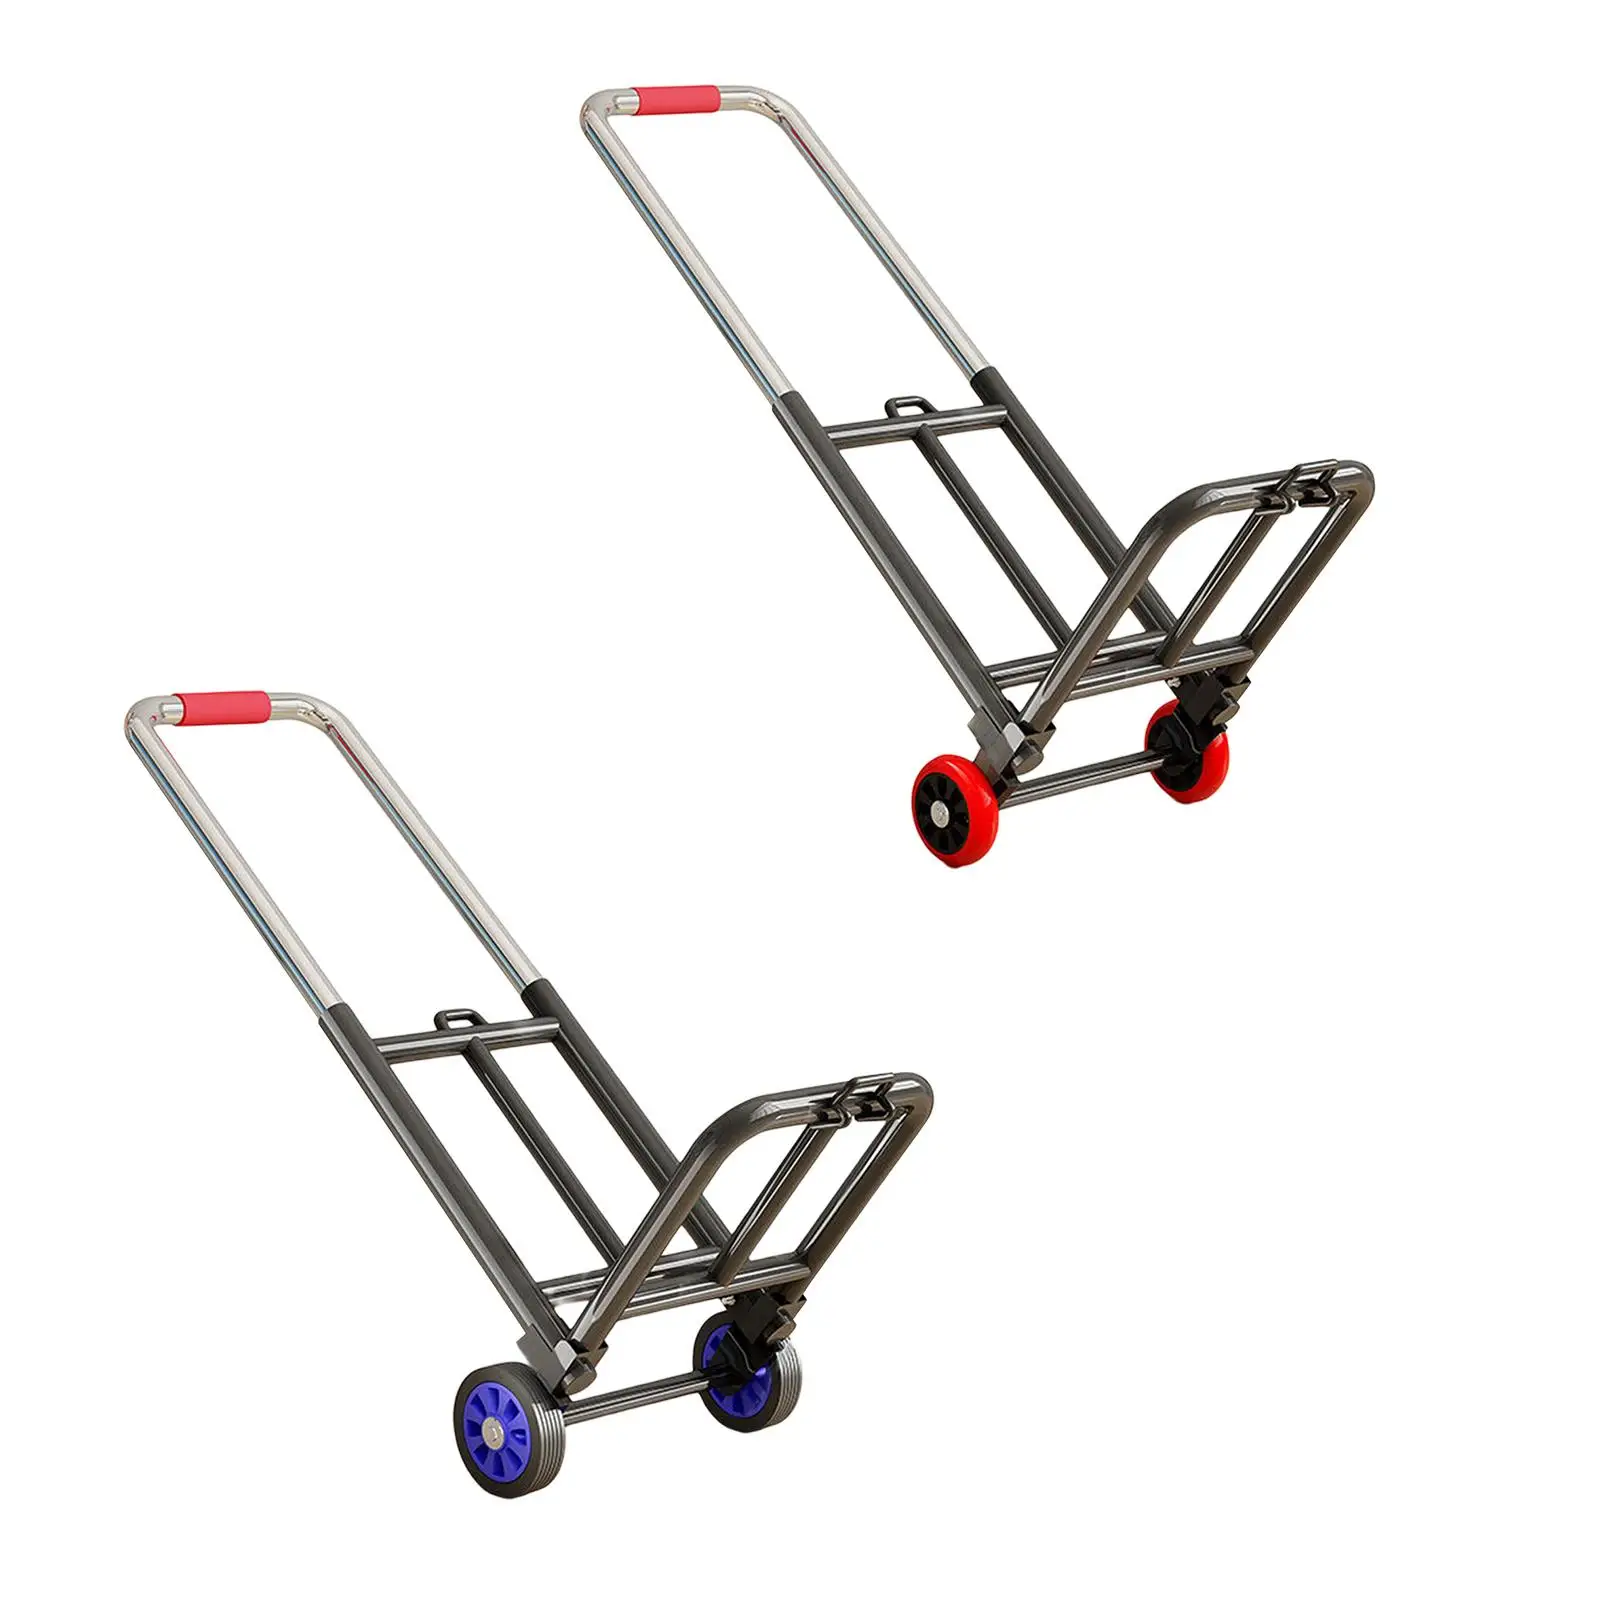 Folding Hand Truck with wheels Portable Folding Hand Cart Luggage Cart Utility Cart for Luggage Office Airport Personal Travel